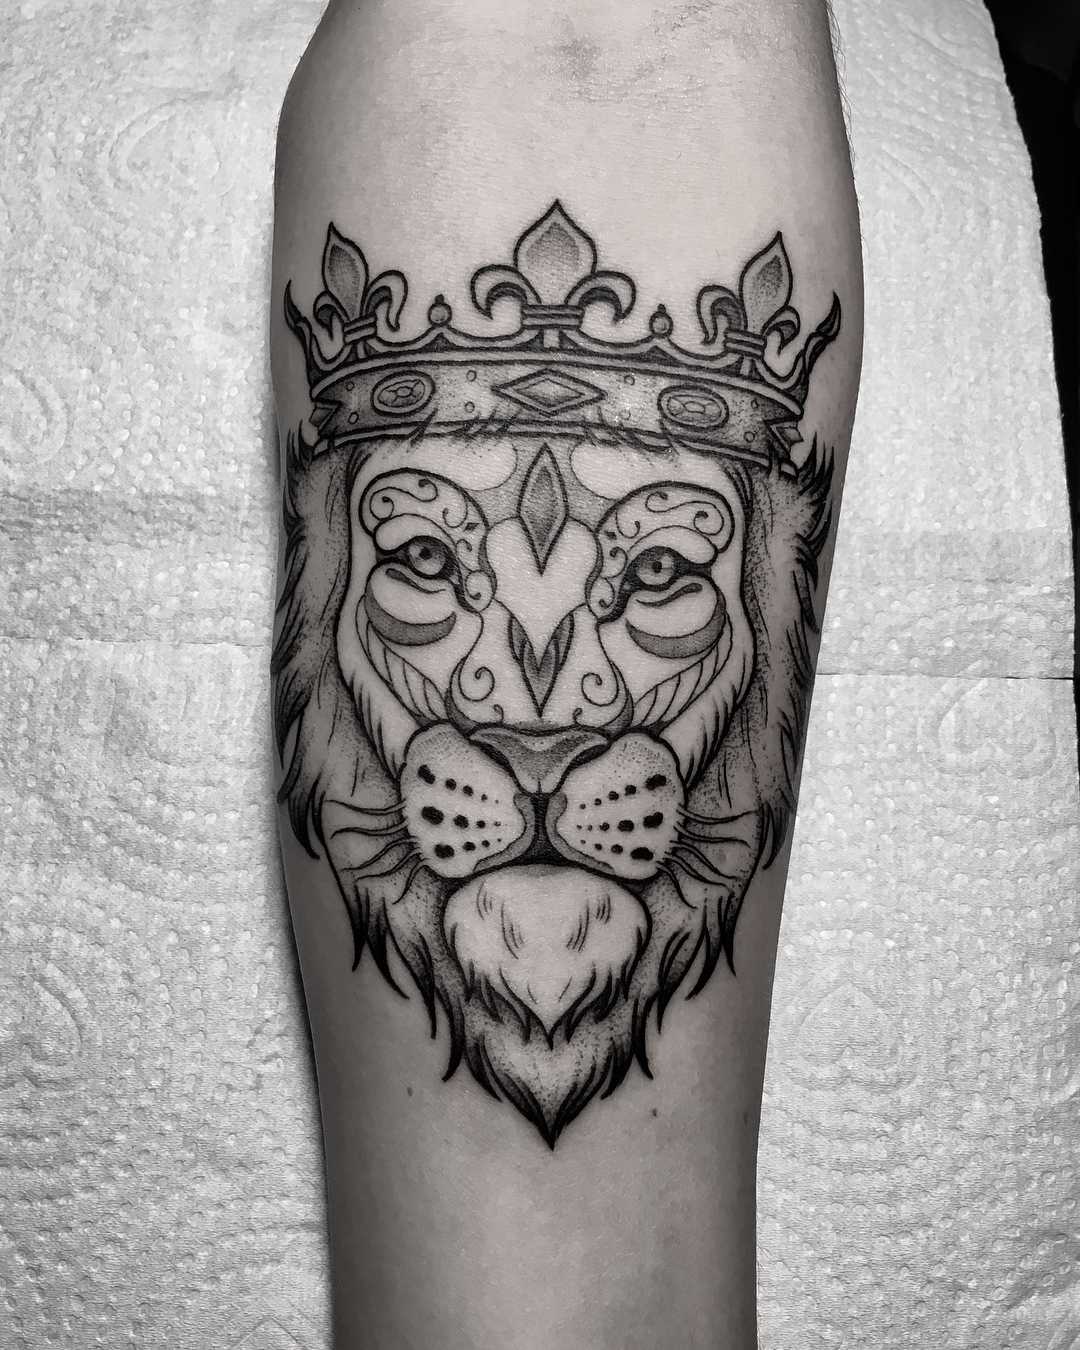 lion with crown meaning